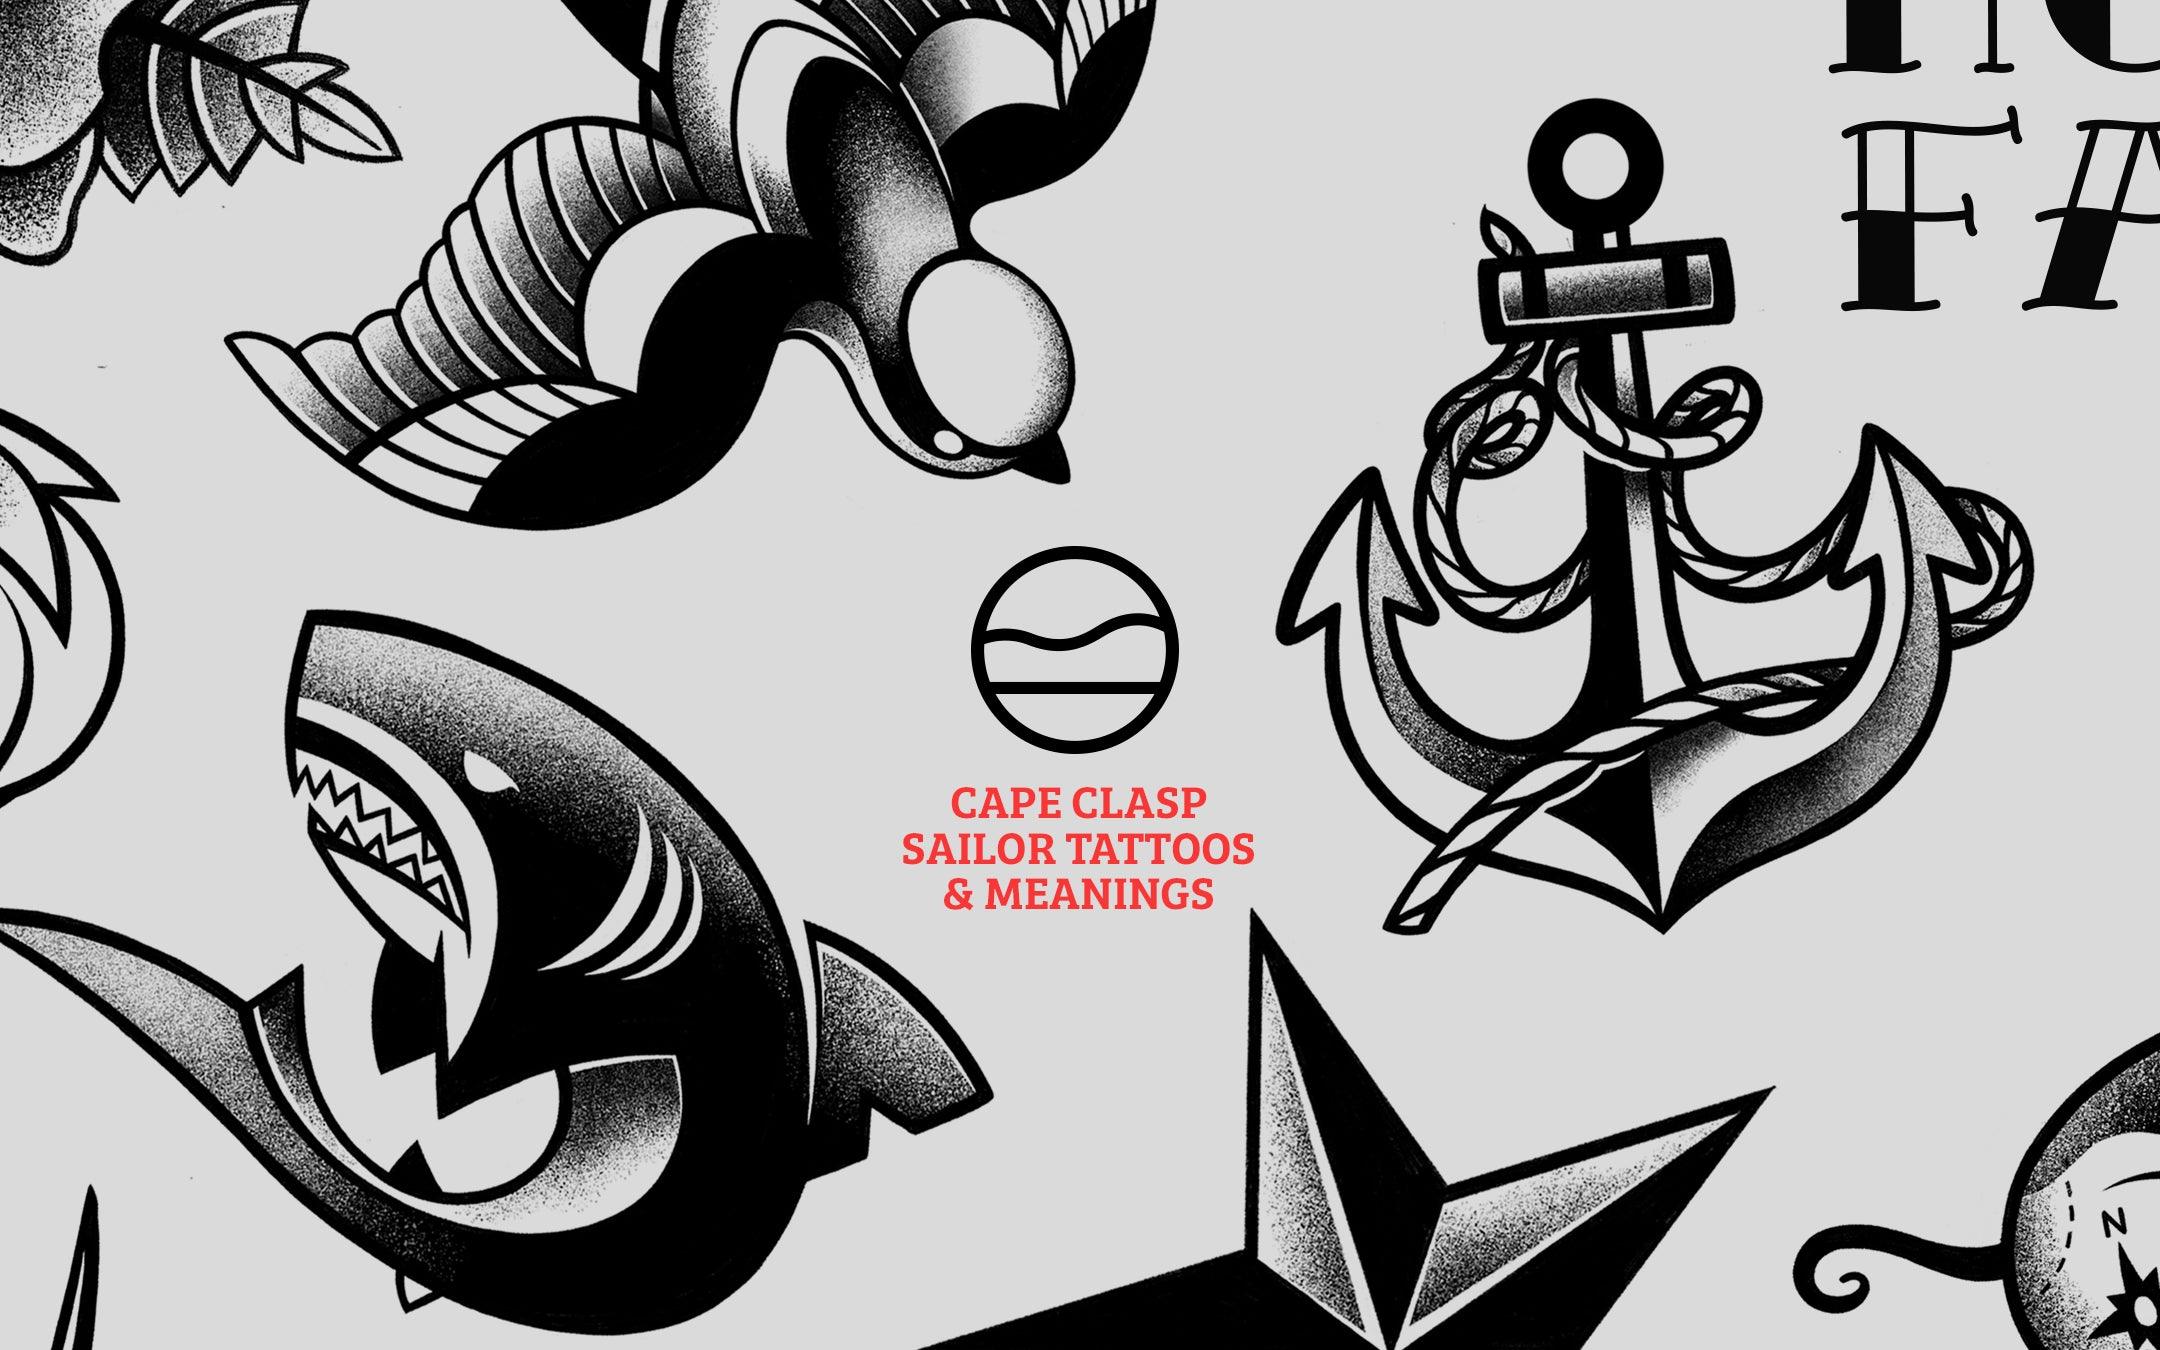 Traditional Sailor Tattoo Meanings - Cape Clasp